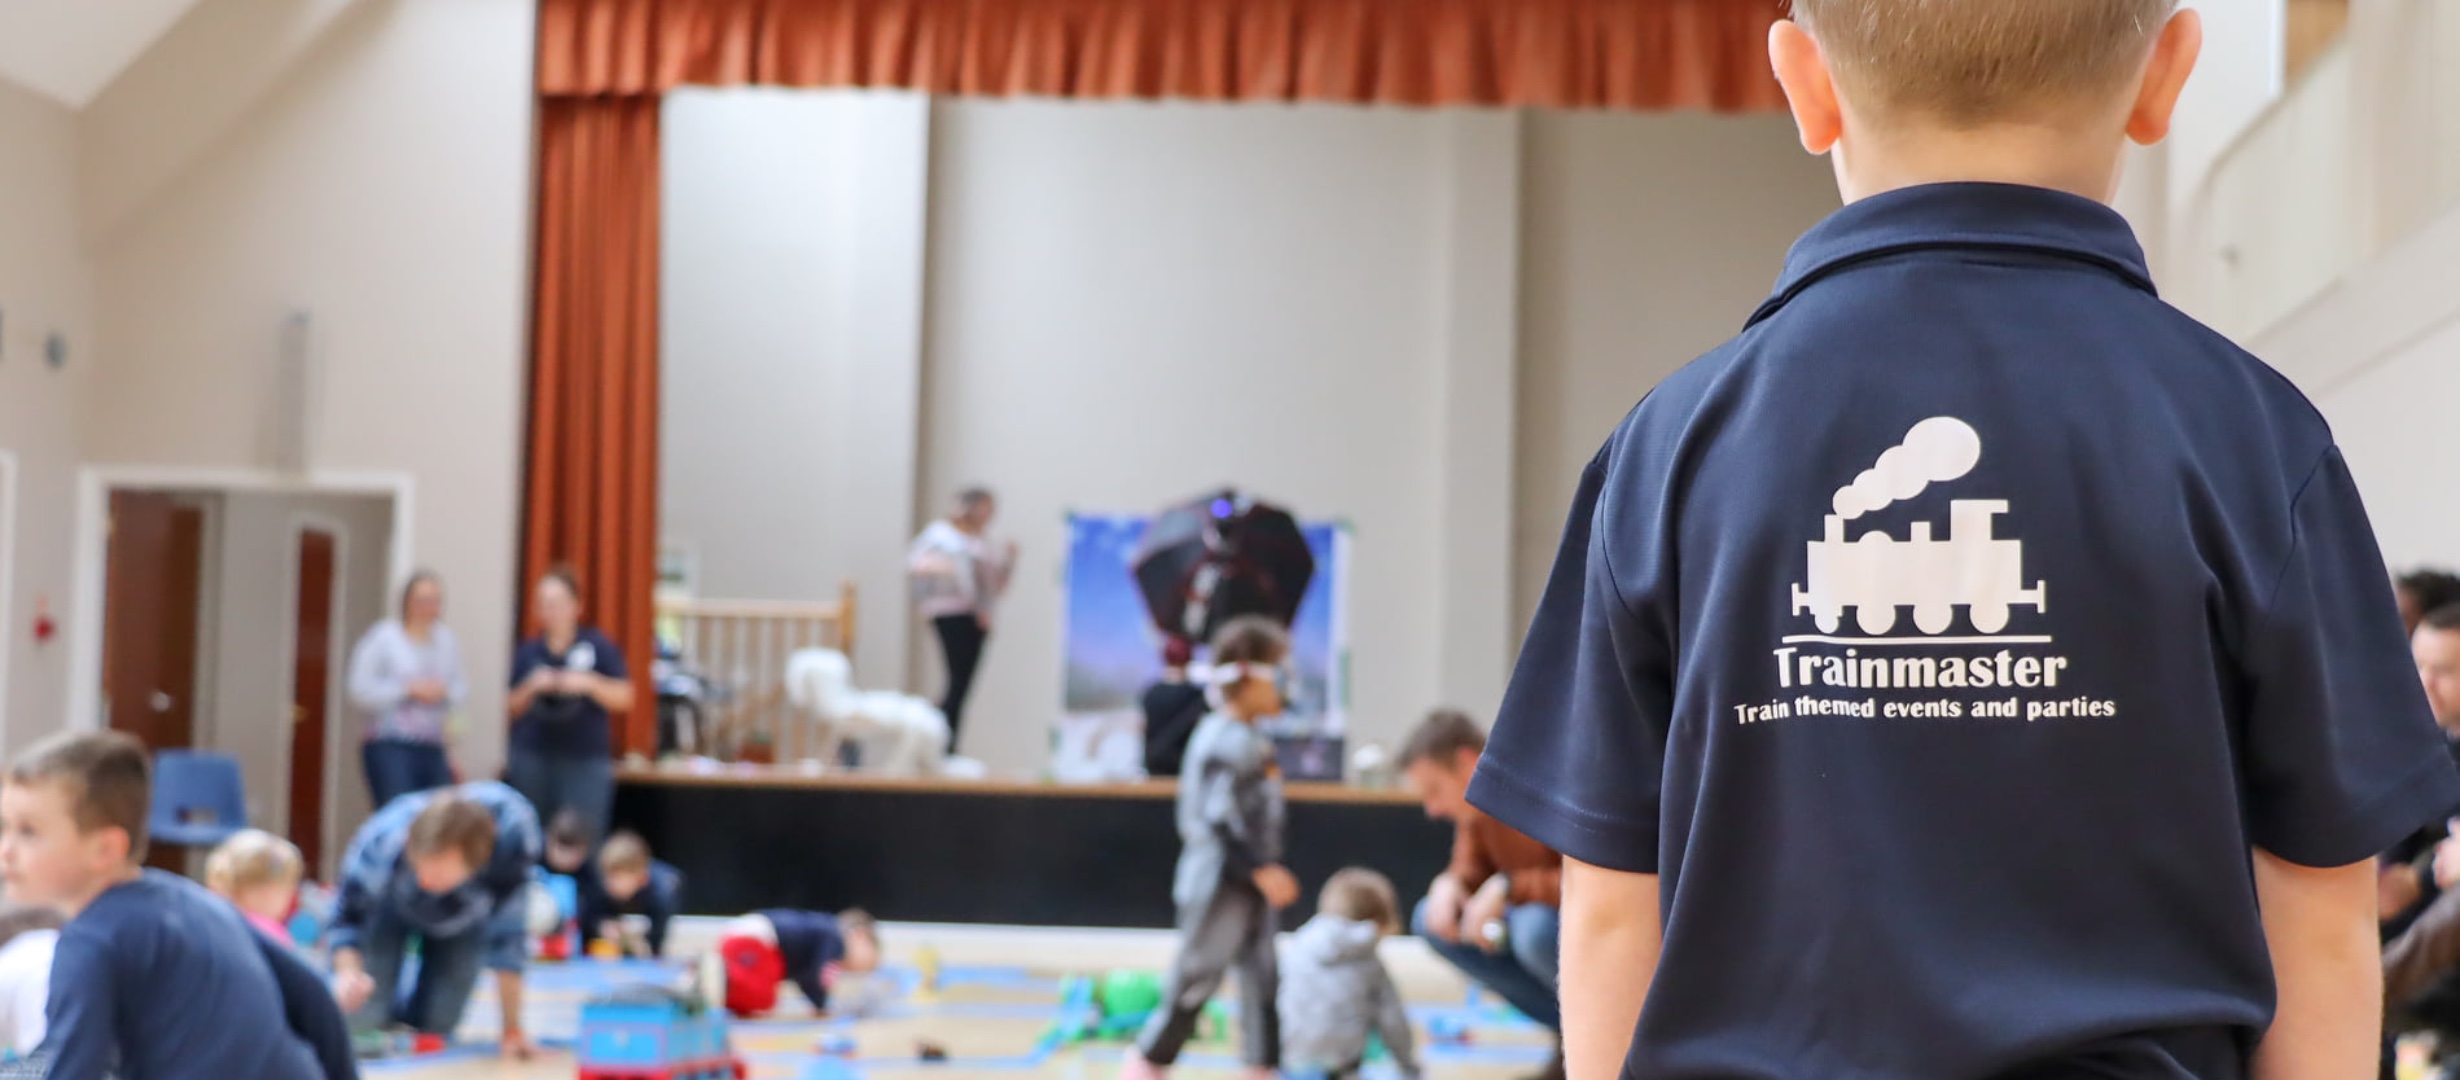 A child stands with his back to the camera. The Trainmaster Gloucestershire logo is seen on the back of his shirt. He faces a hall filled with train track and other train activities with children and adults playing freely